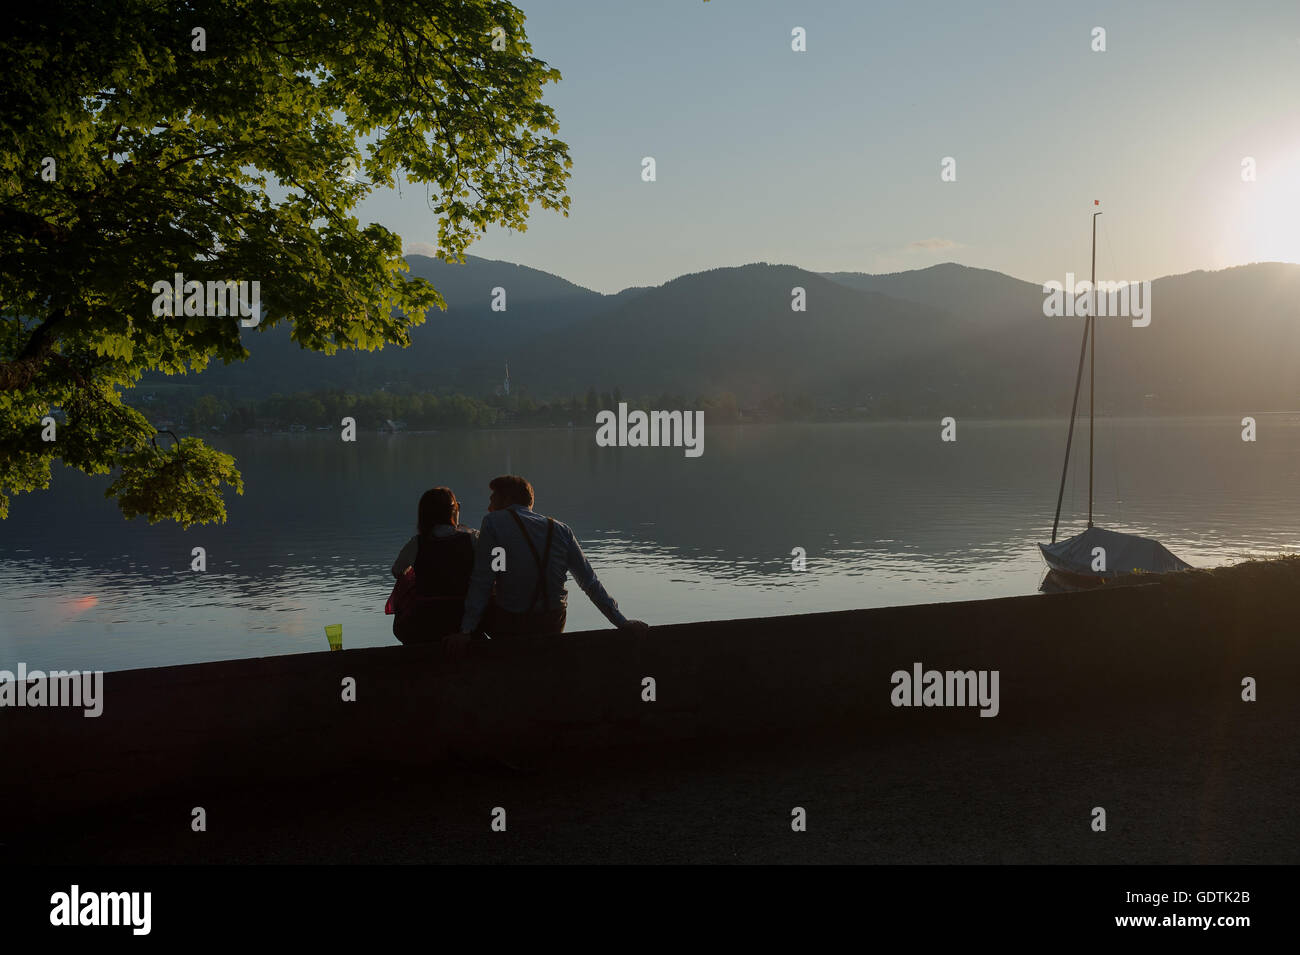 GERMANY, Bavaria, Tegernsee, May 28, 2016. A couple at the shore of the Tegernsee. Stock Photo